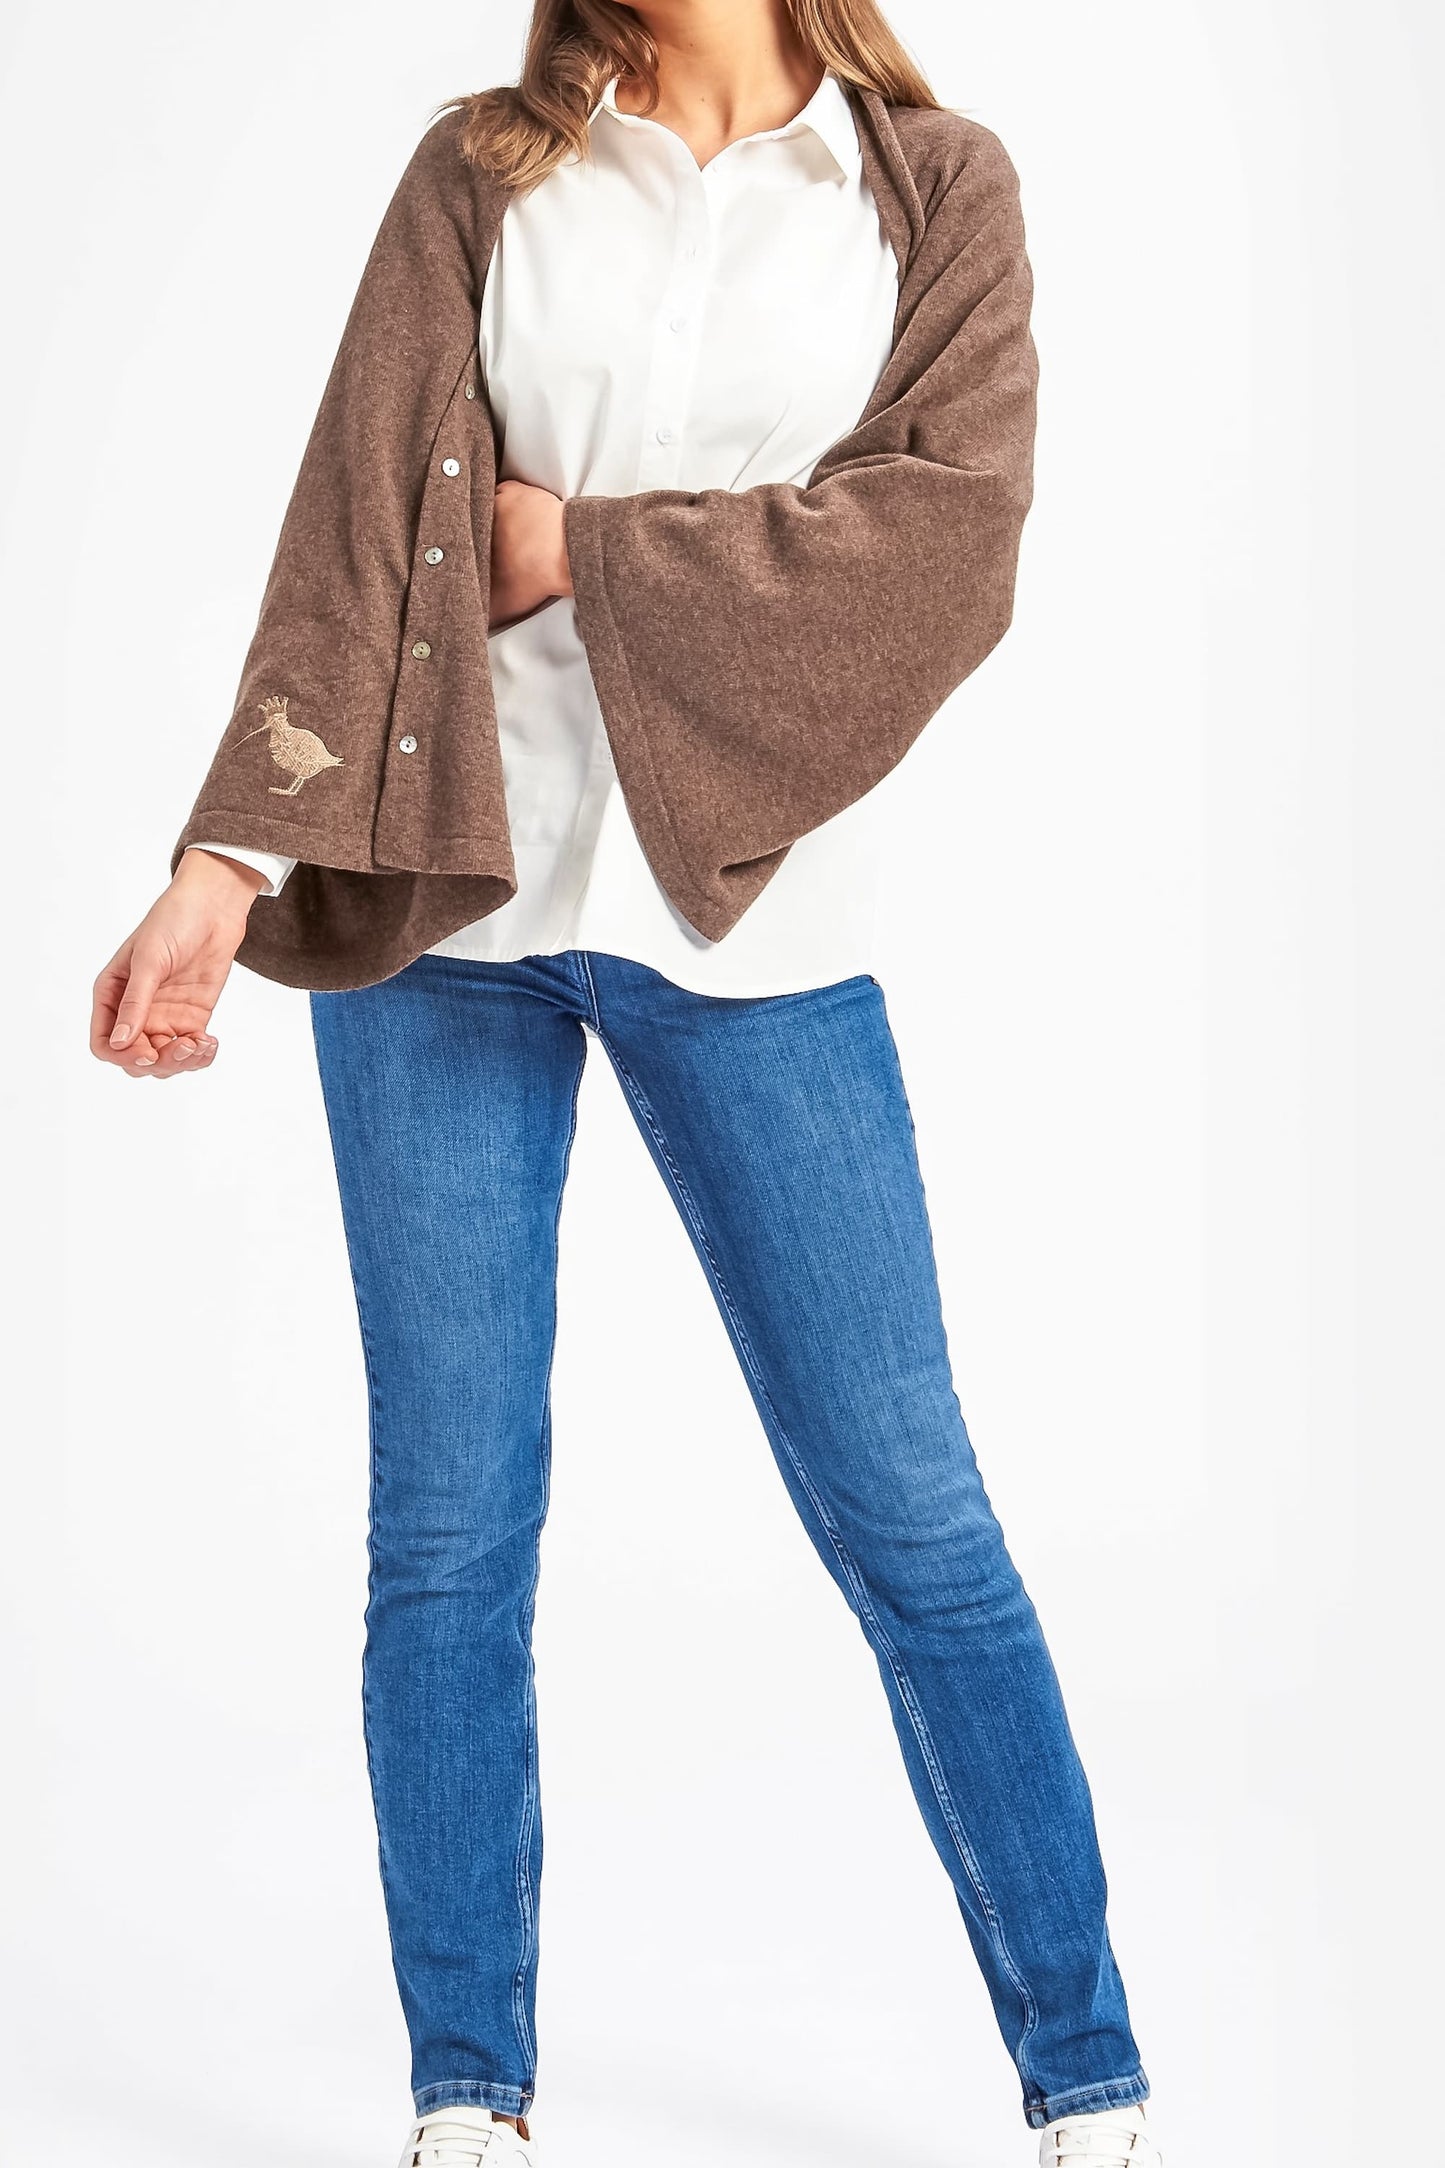 Cashmere & Merino Wool Long Length Button Poncho in Brown by Woodcock & Cavendish for sale - Woodcock and Cavendish